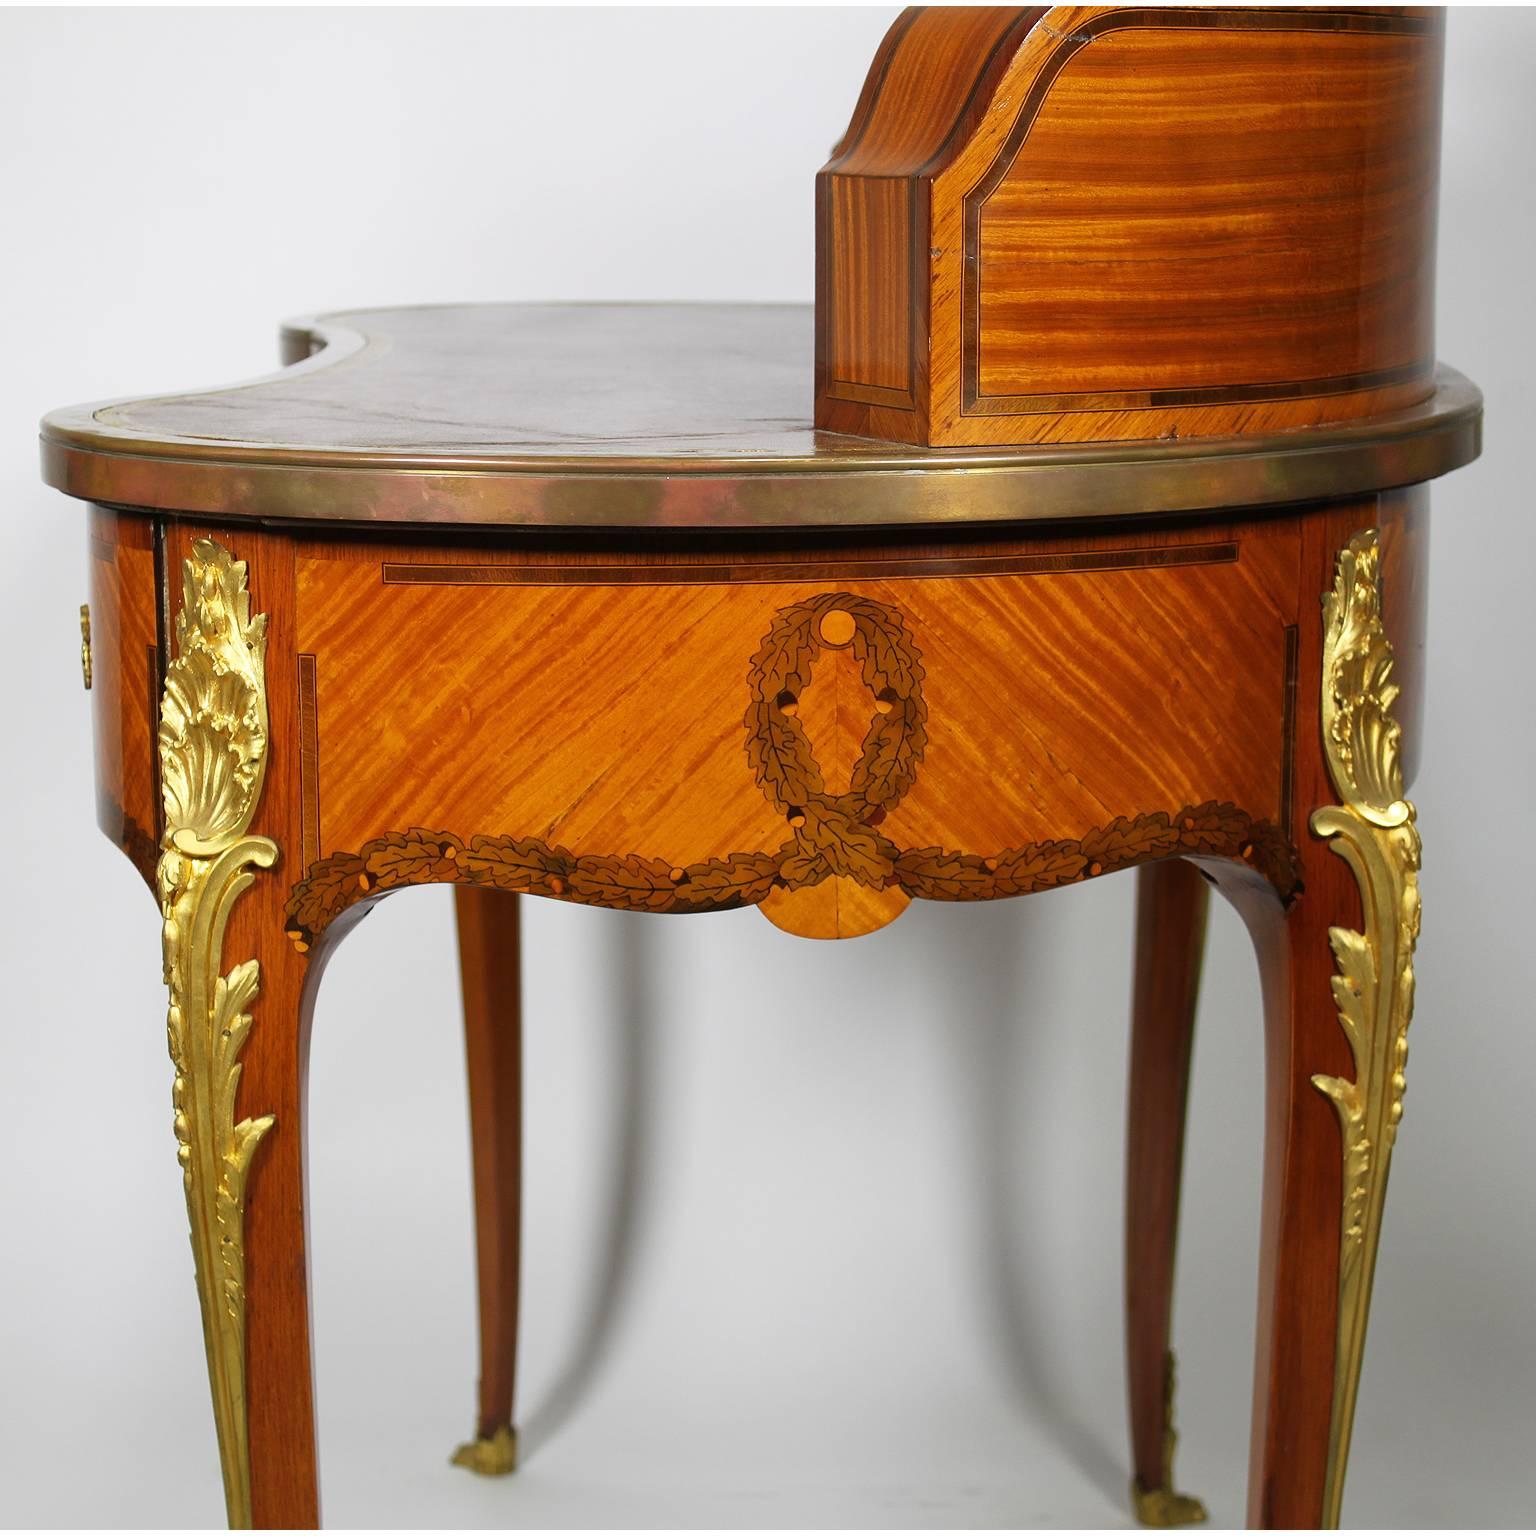 Fine French 19th Century Louis XV Style Tulipwood and Ormolu-Mounted Ladies Desk For Sale 6